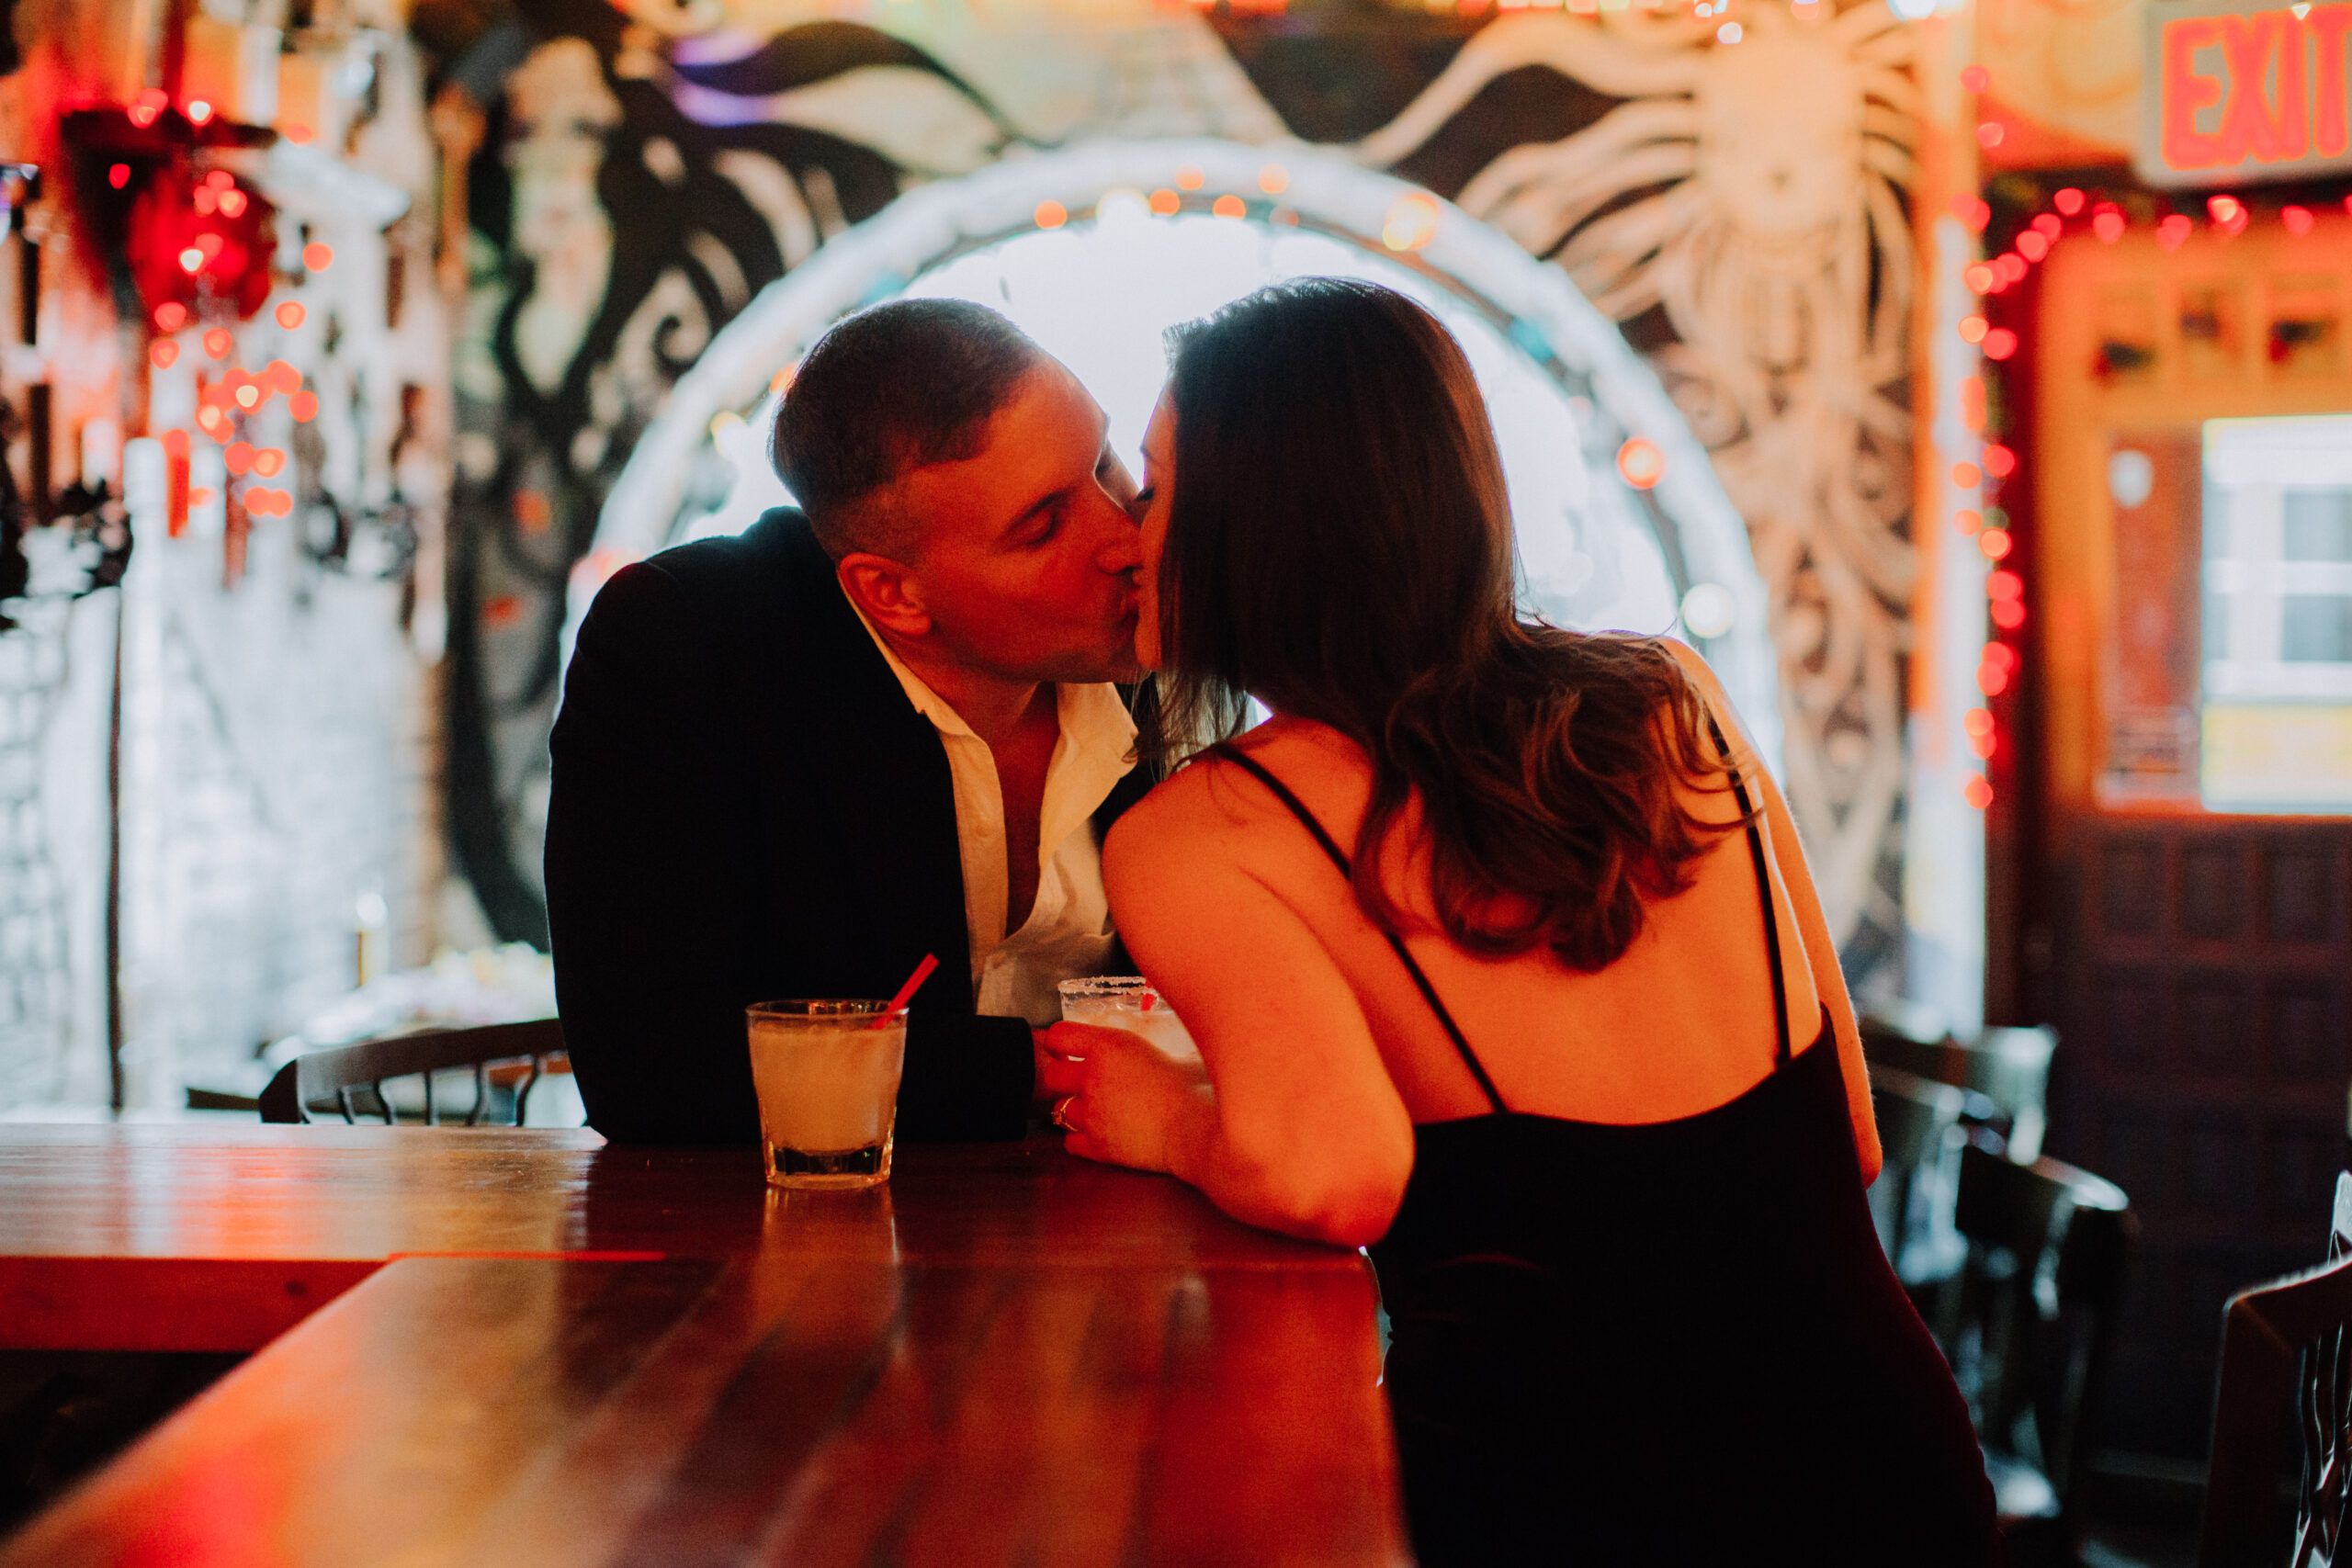 stunning couple share a kiss over drinks in a bar